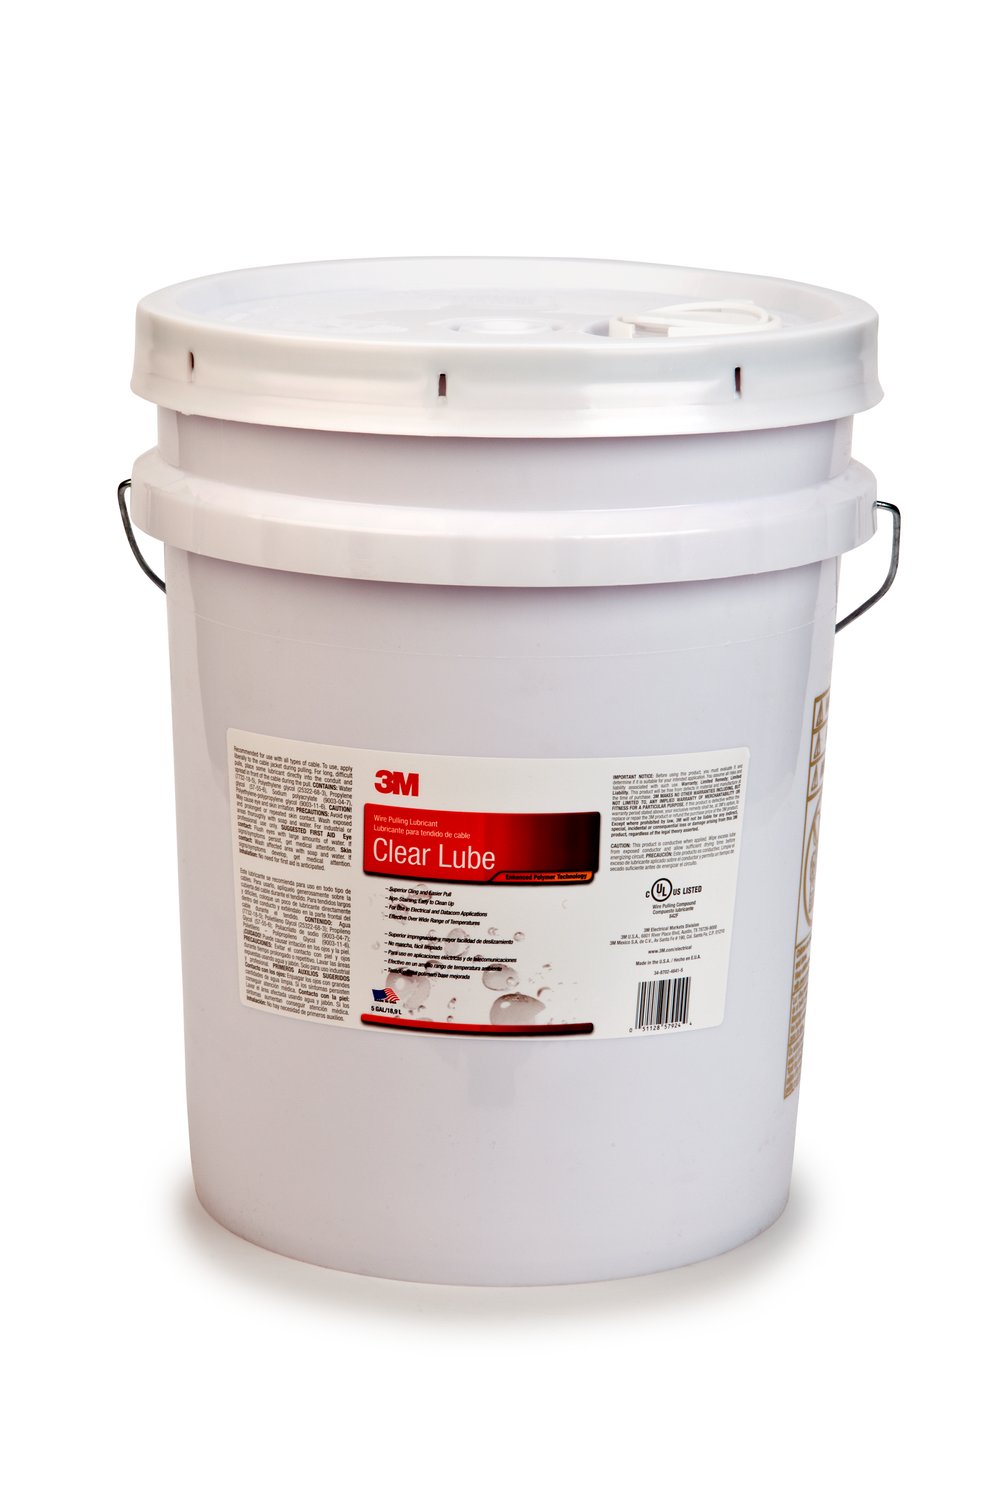 7000058274 - 3M Wire Pulling Lubricant Gel WL-55, 55 Gallon Drum, excellent
lubricant for pulling a wide variety of cables types, 1 Drum/DR